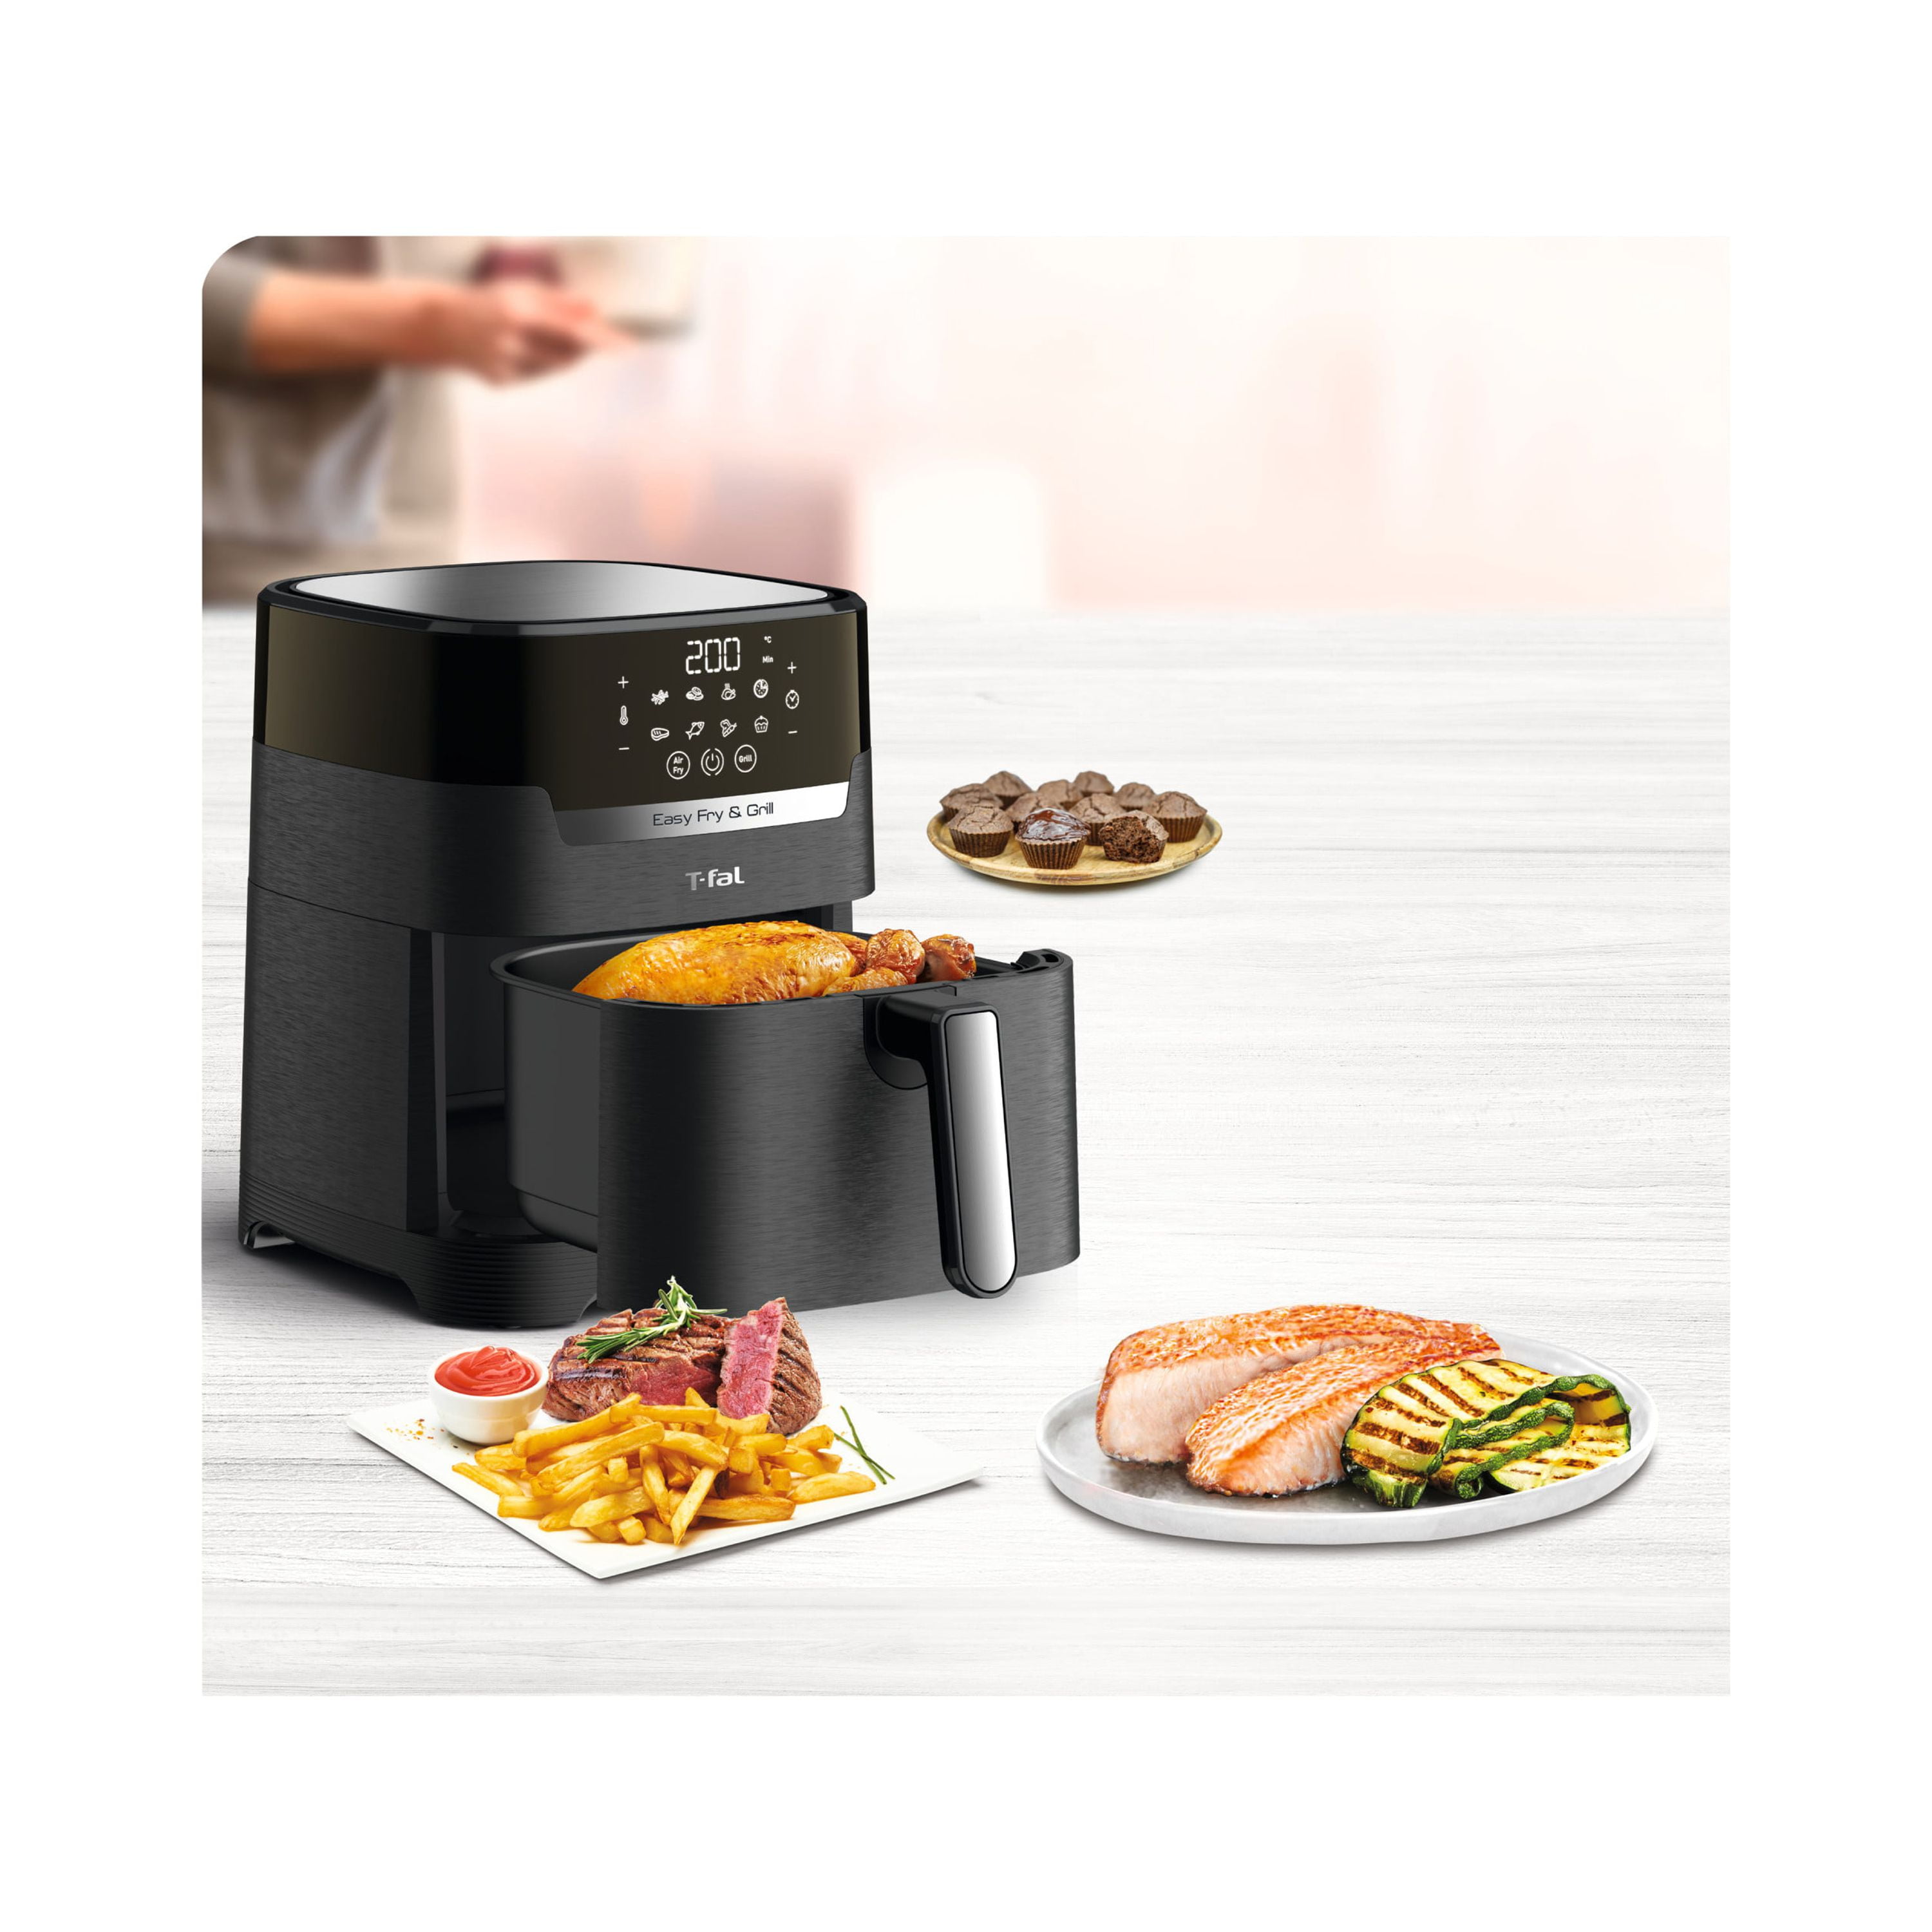 Friteuse sans huile Easy Fry & Grill Digital + Couteau Tefal 1400W